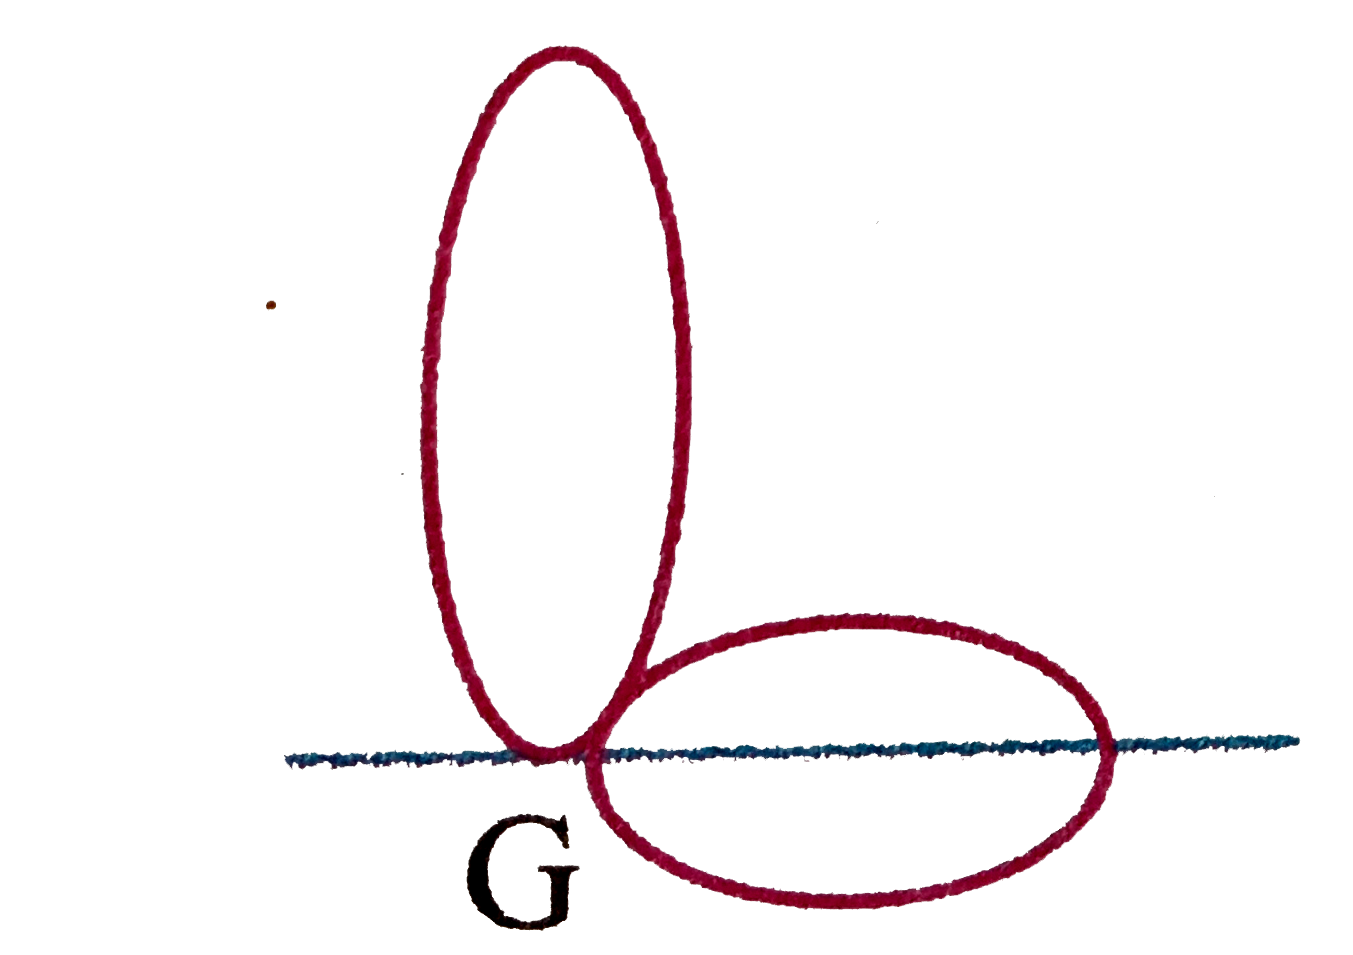 Two circular rings each of mass M  and radius R are attached to each other at their rims and their planes perpendicular to each other as shown in figure. The moment of inertia of the system about a diameter of one of the rings and passing through the point of contanct is